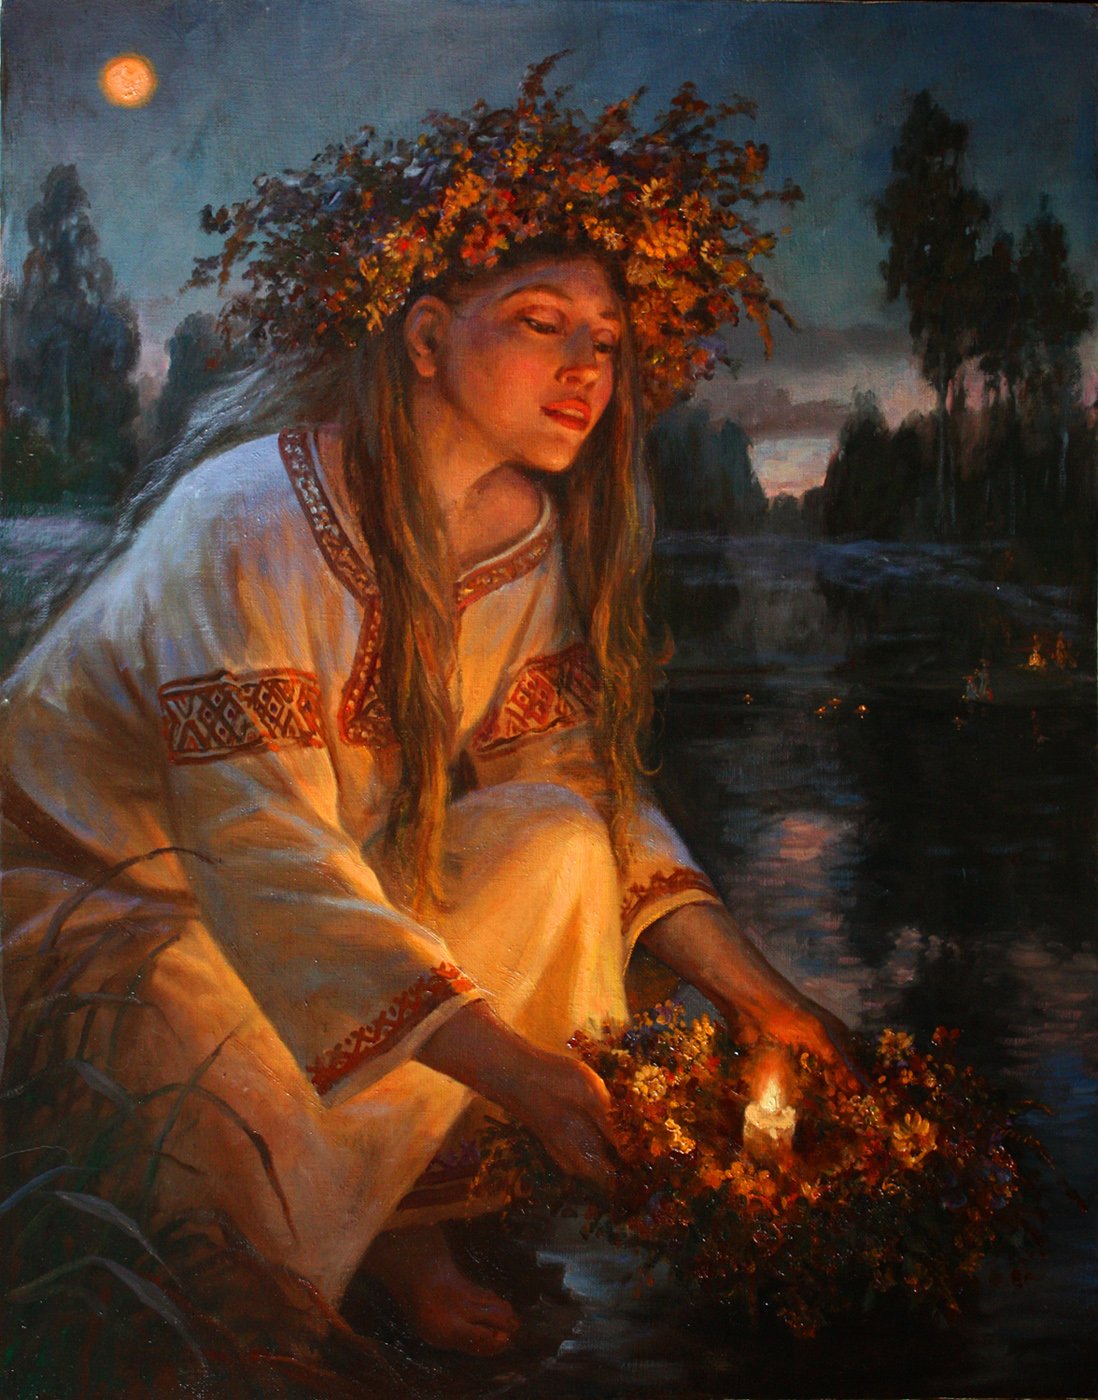 A painting of a Kupala night ritual. A young woman in a flower headdress is crouching next to a river. She is floating a candle in a bed of flowers.